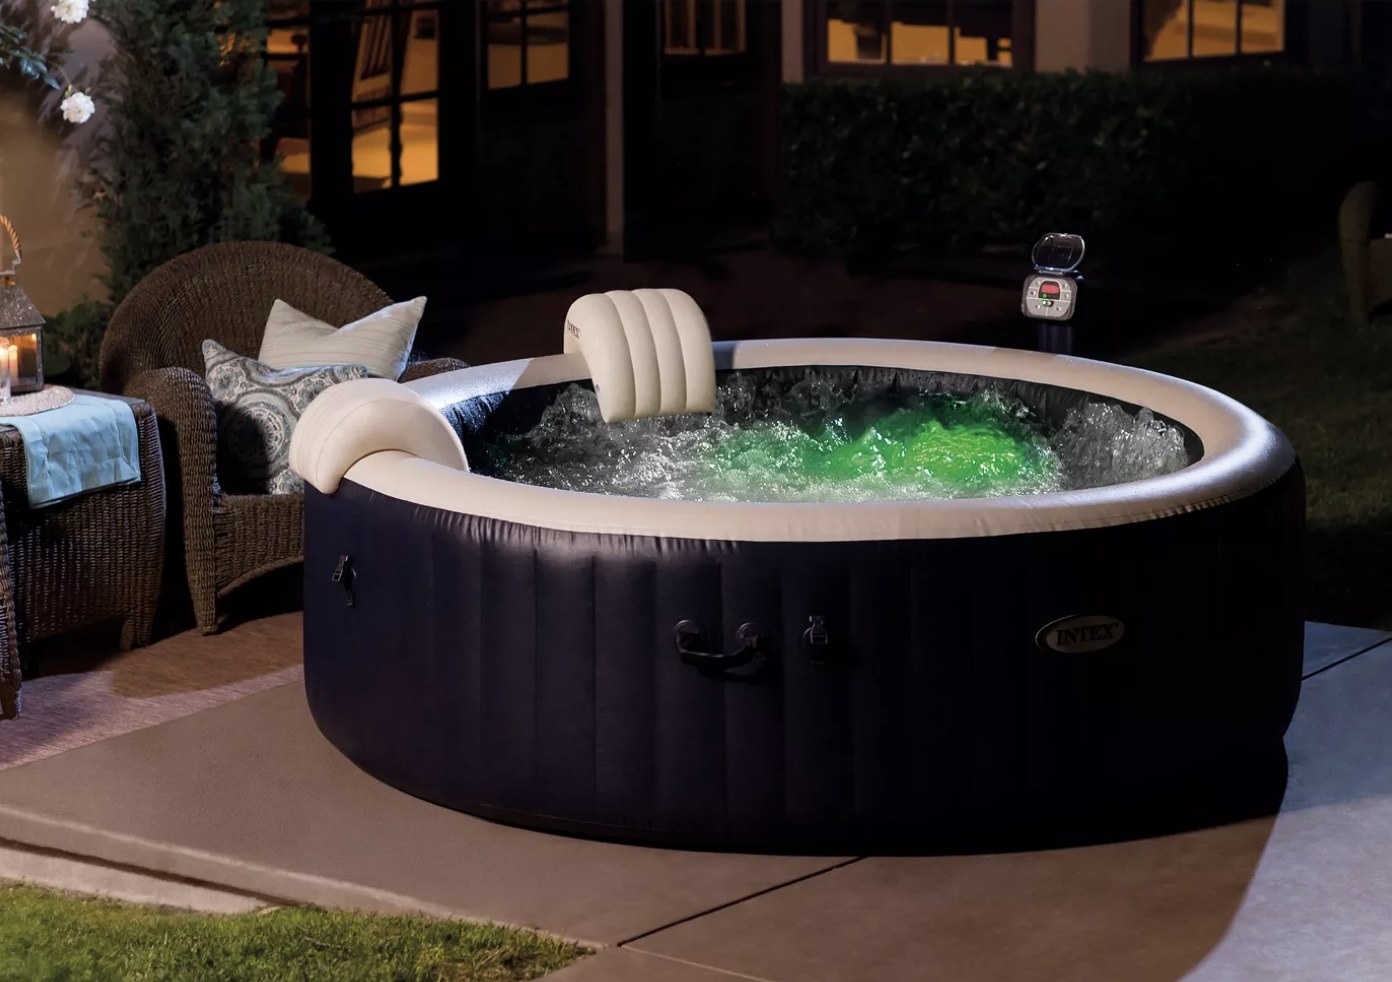 The inflatable hot tub